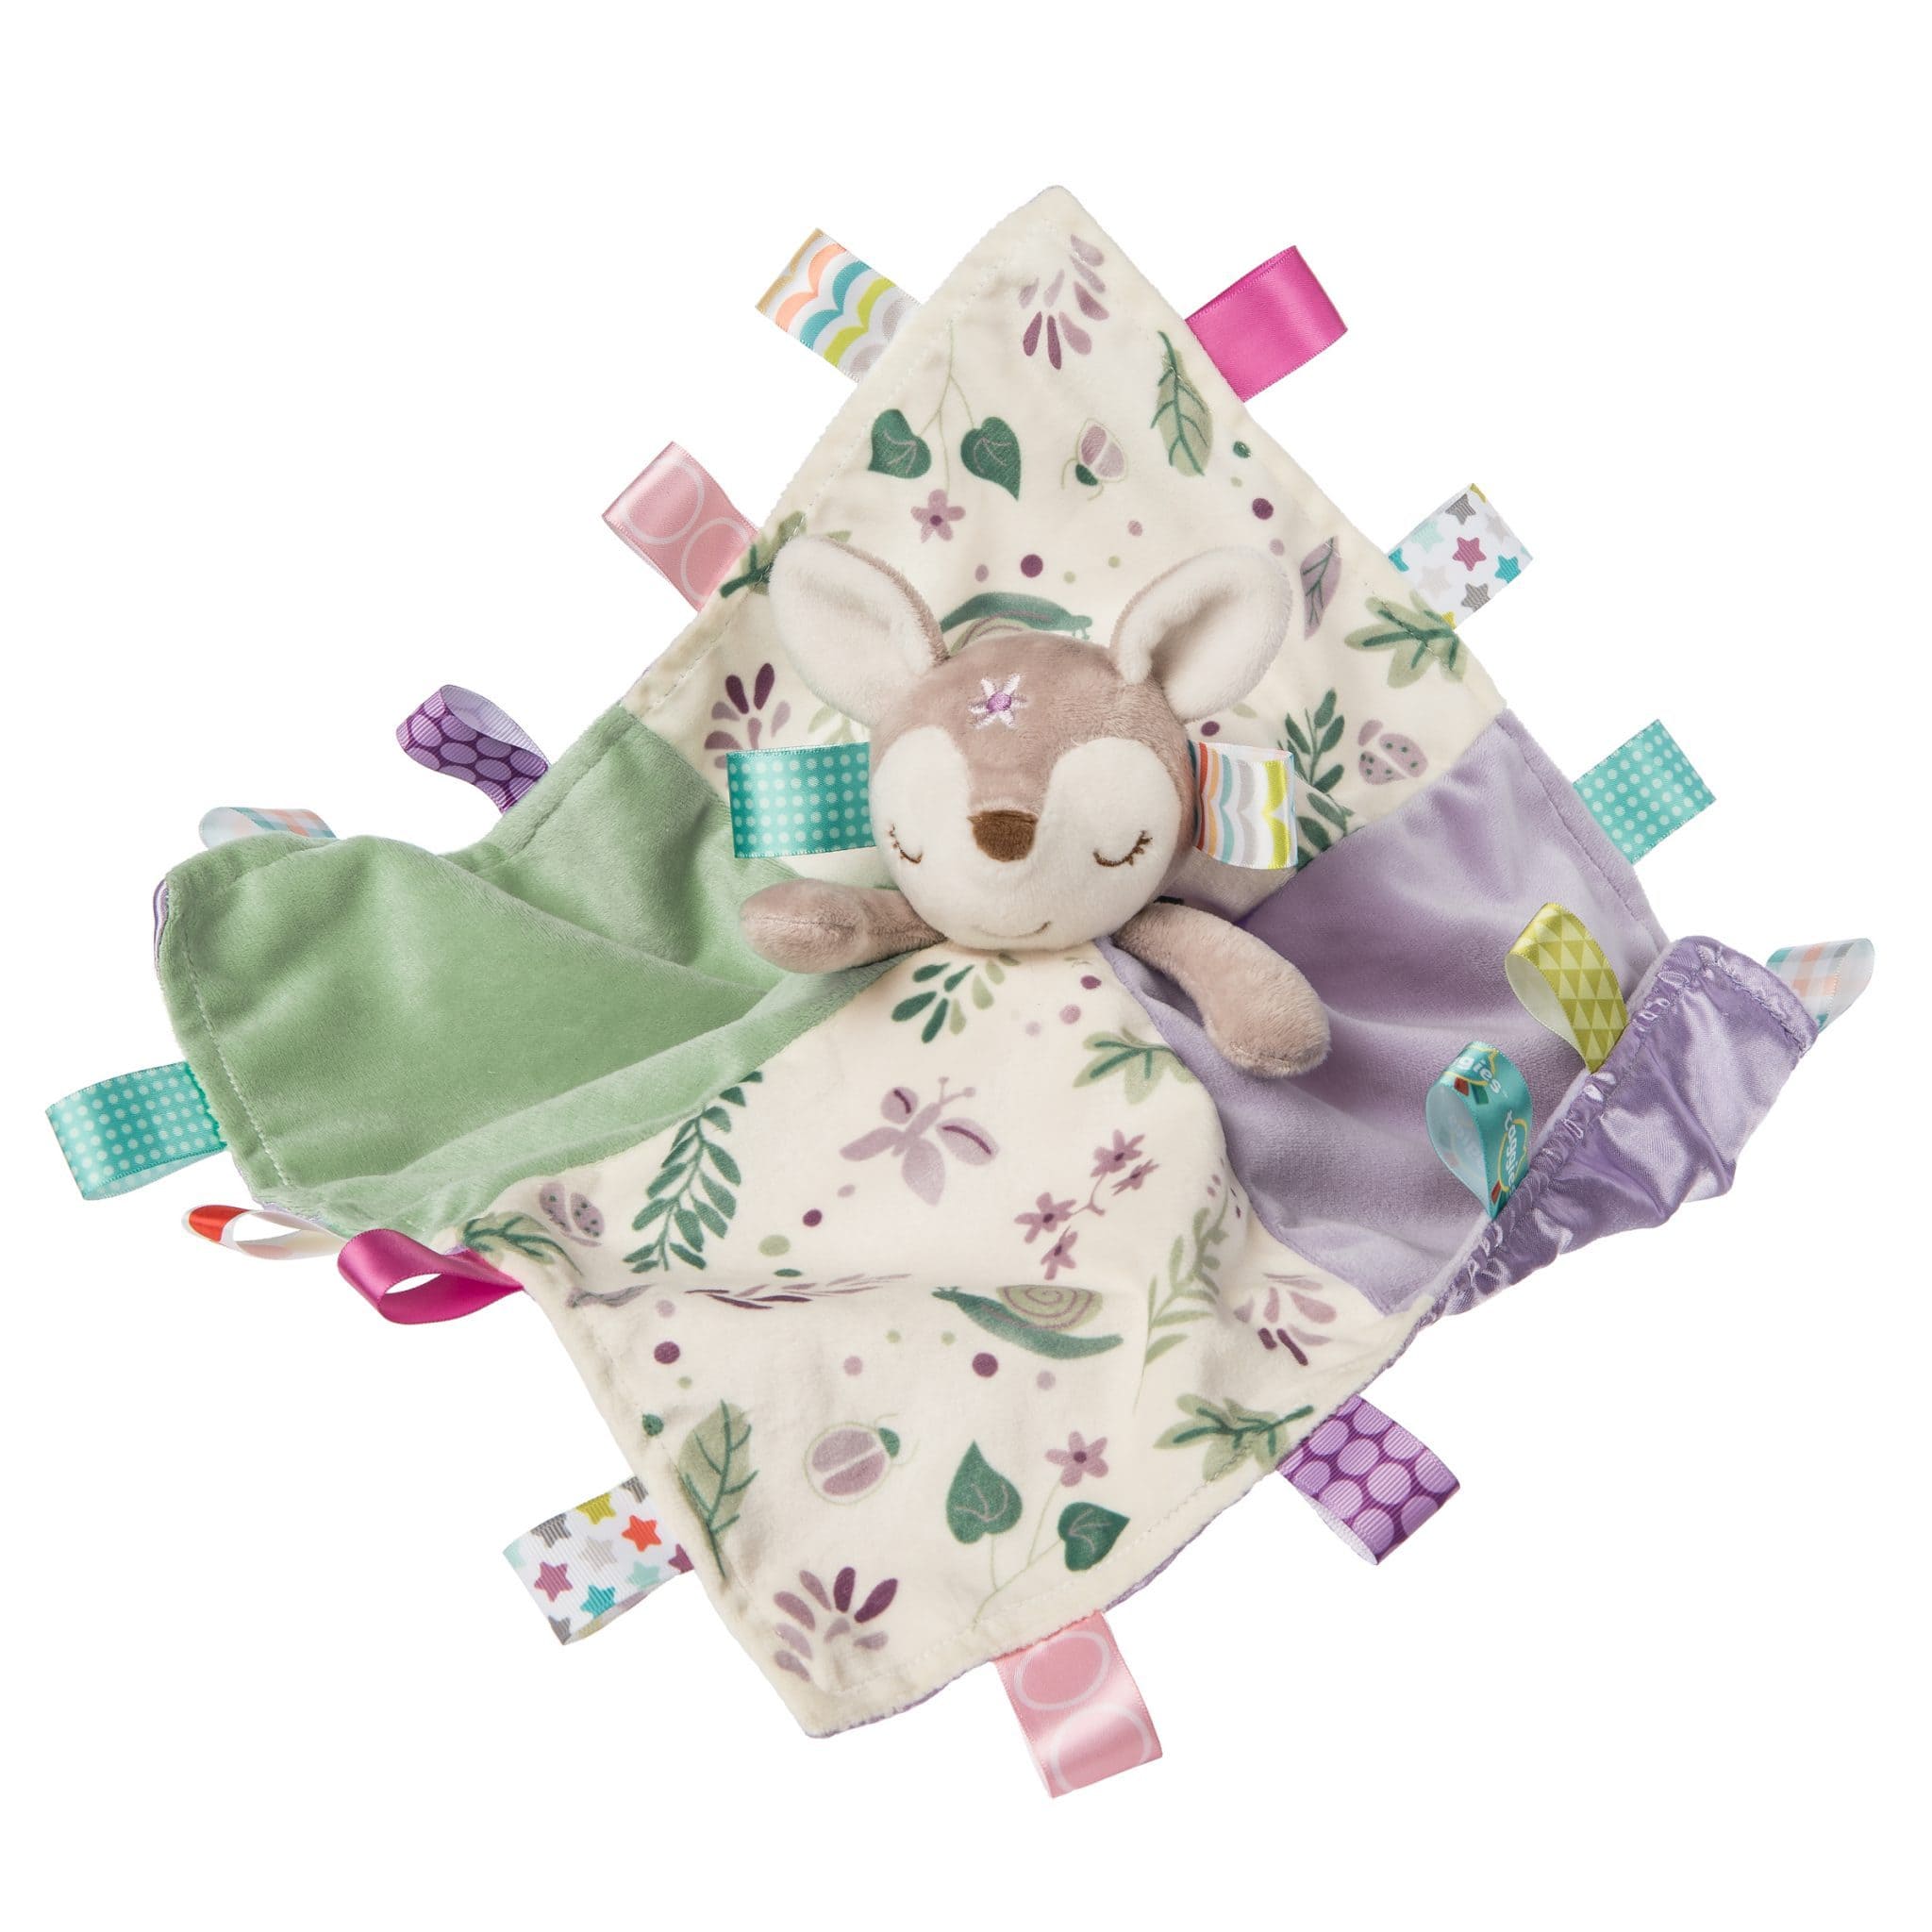 Taggies Flora Fawn Character Blanket Comforter by Mary Meyer - Bumbles & Boo